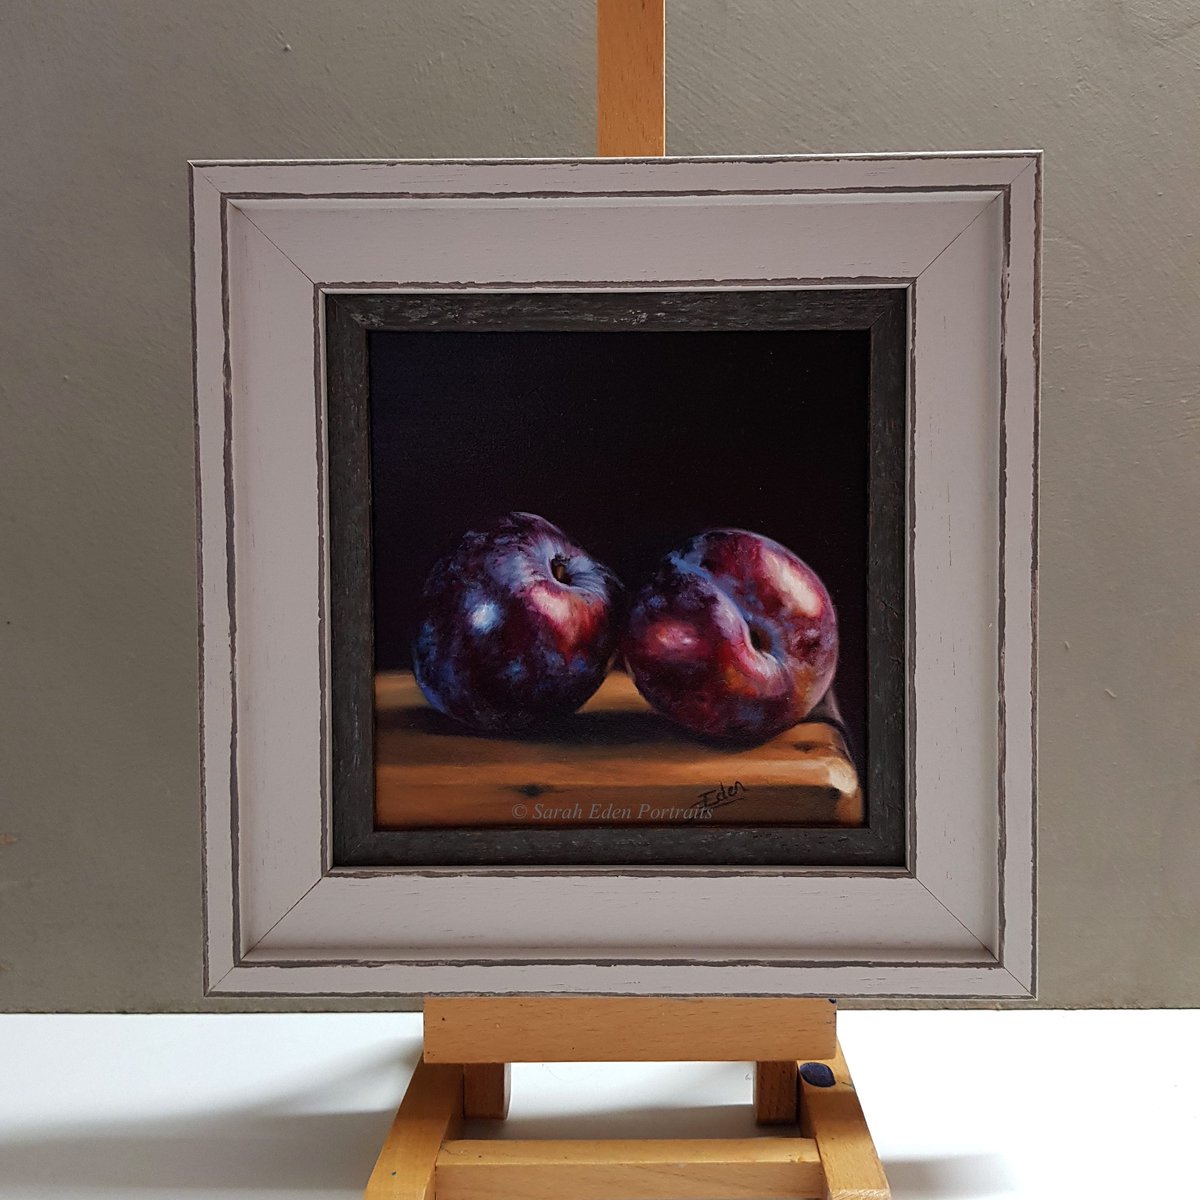 Repost of plums I painted a few years back but still one of my personal favourites 🍇🍐🍉

#artforsale #buyoriginalart #interiordecor #oneoff #plum #stilllife #stilllifepainting #oilpainting #fineart #fruit #contemporaryart #contemporarypainting #realism #artist #oldmasters